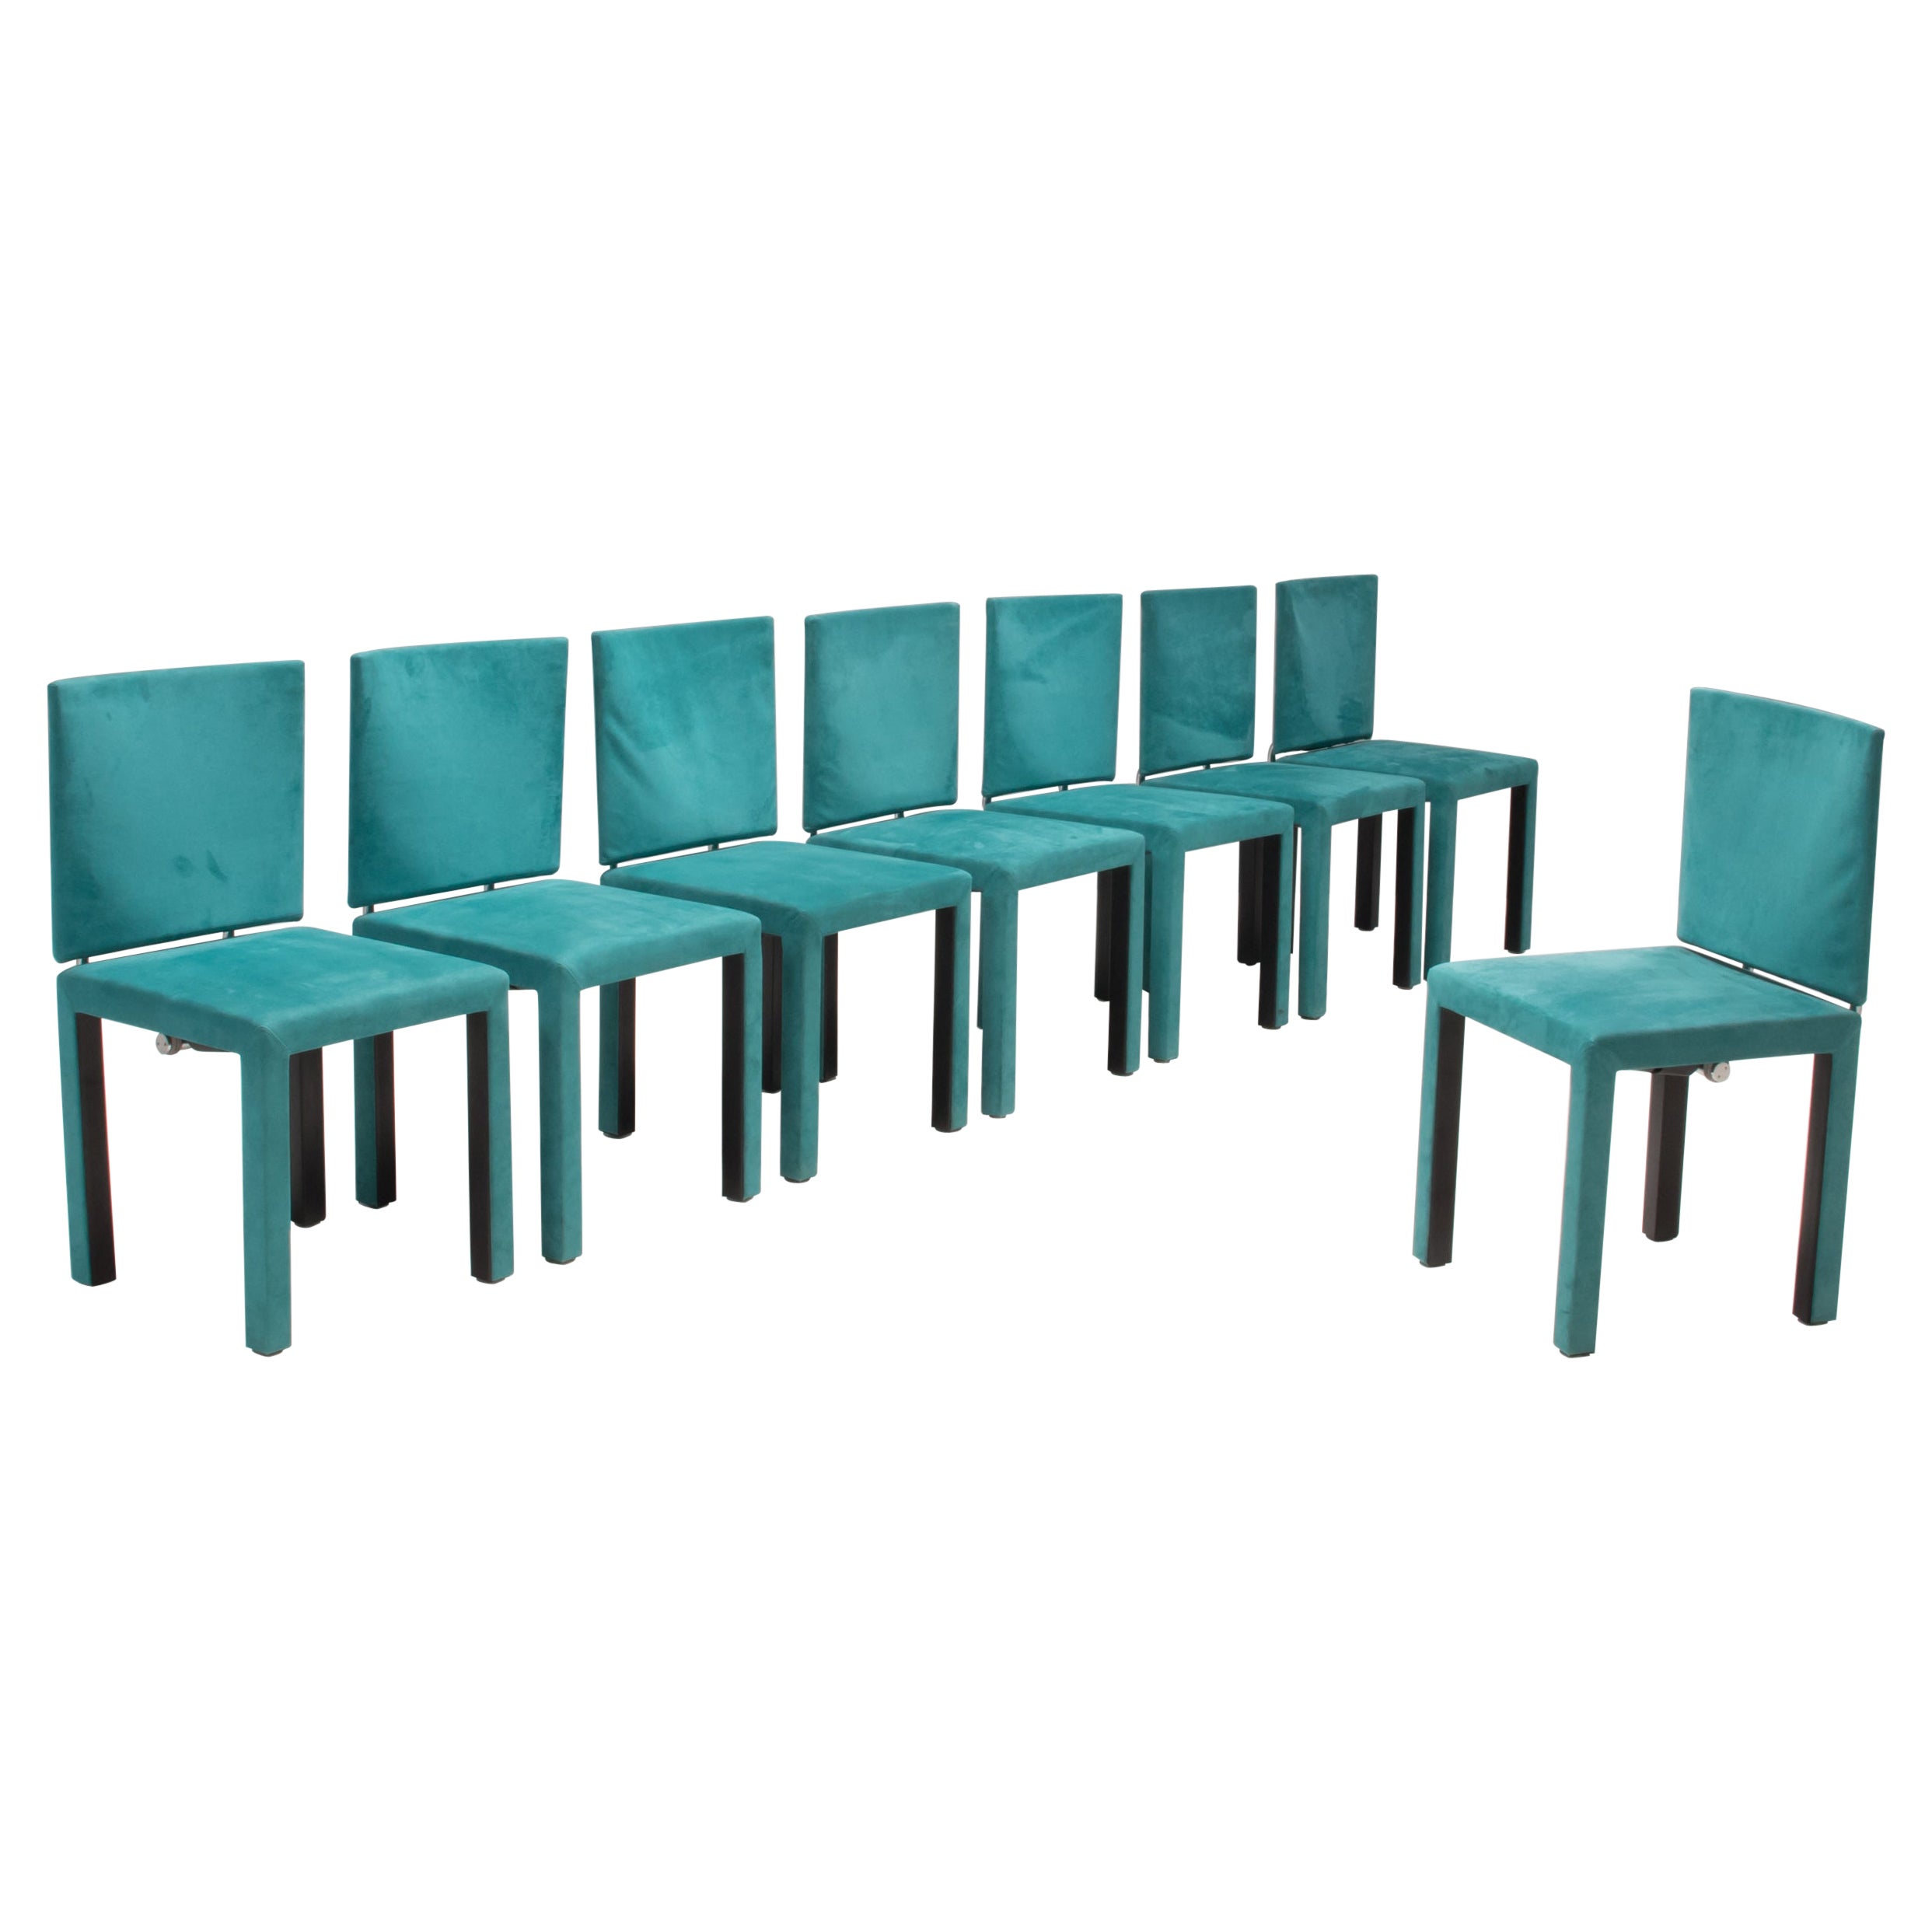 Paolo Piva for B&B Italia Green Velvet Acara Dining Chairs, Set of 8